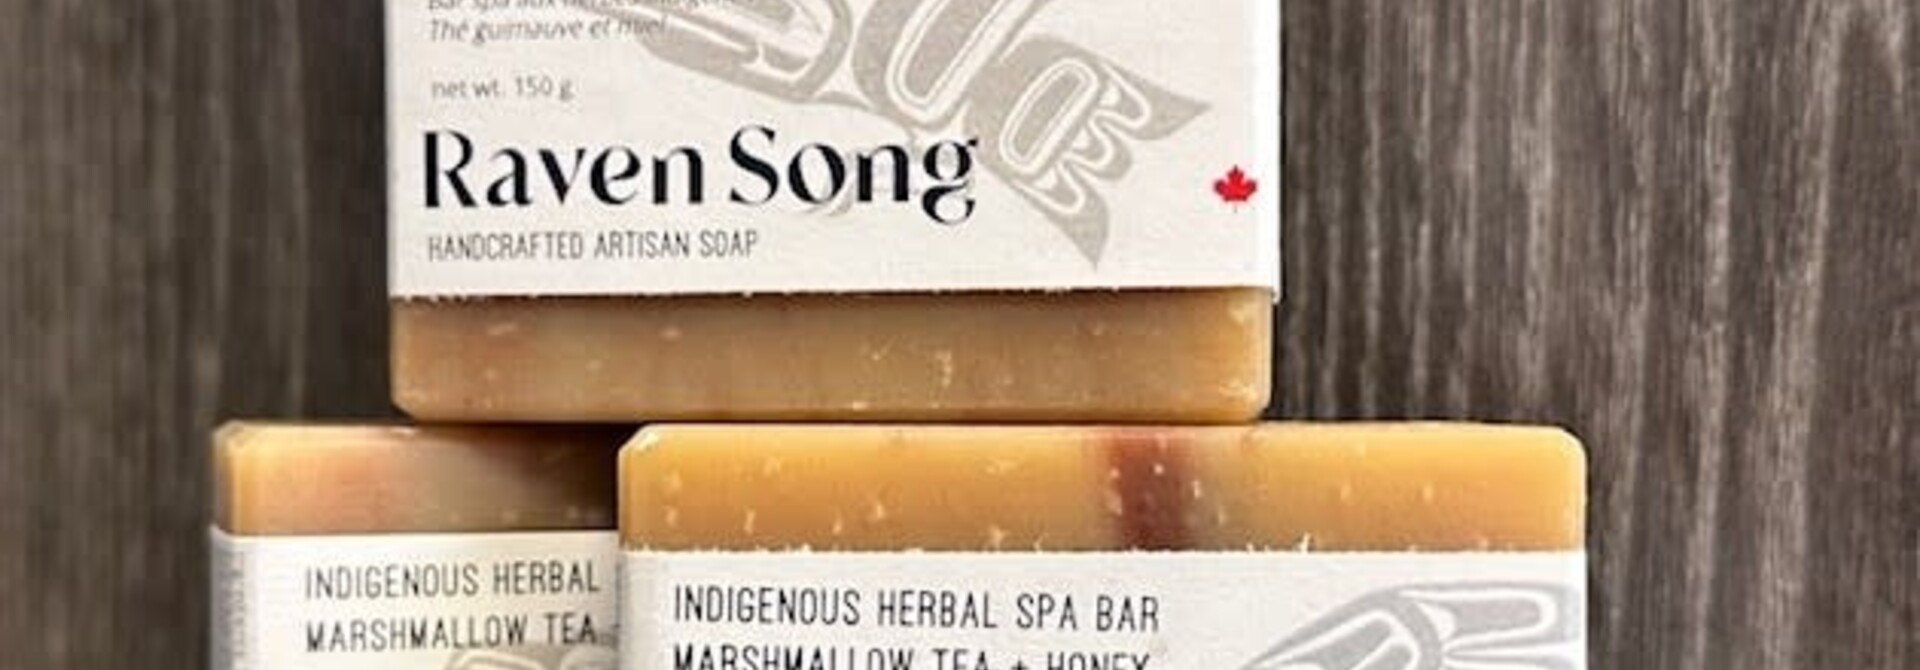 Deluxe Artisan Marshmallow and Honey Soap by Raven Song Soaps